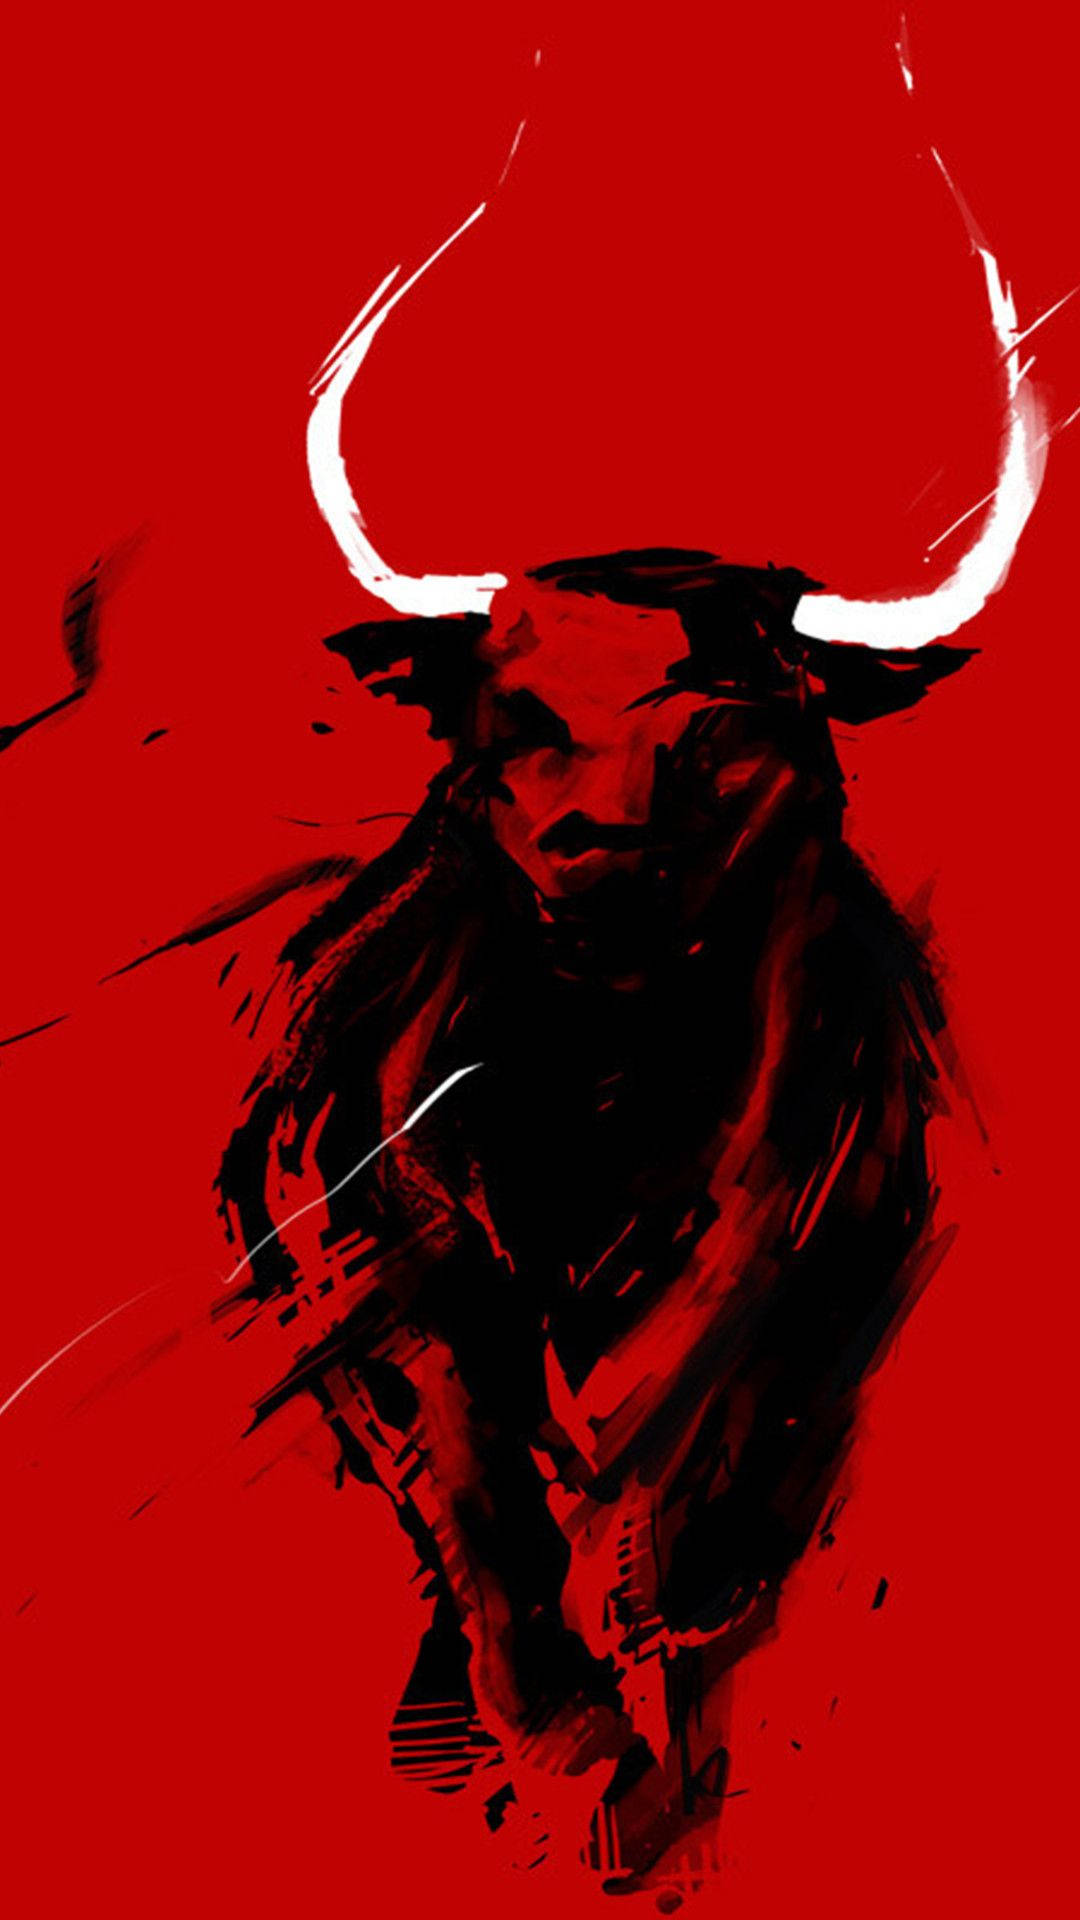 1080X1920 Chicago Bulls Wallpaper and Background